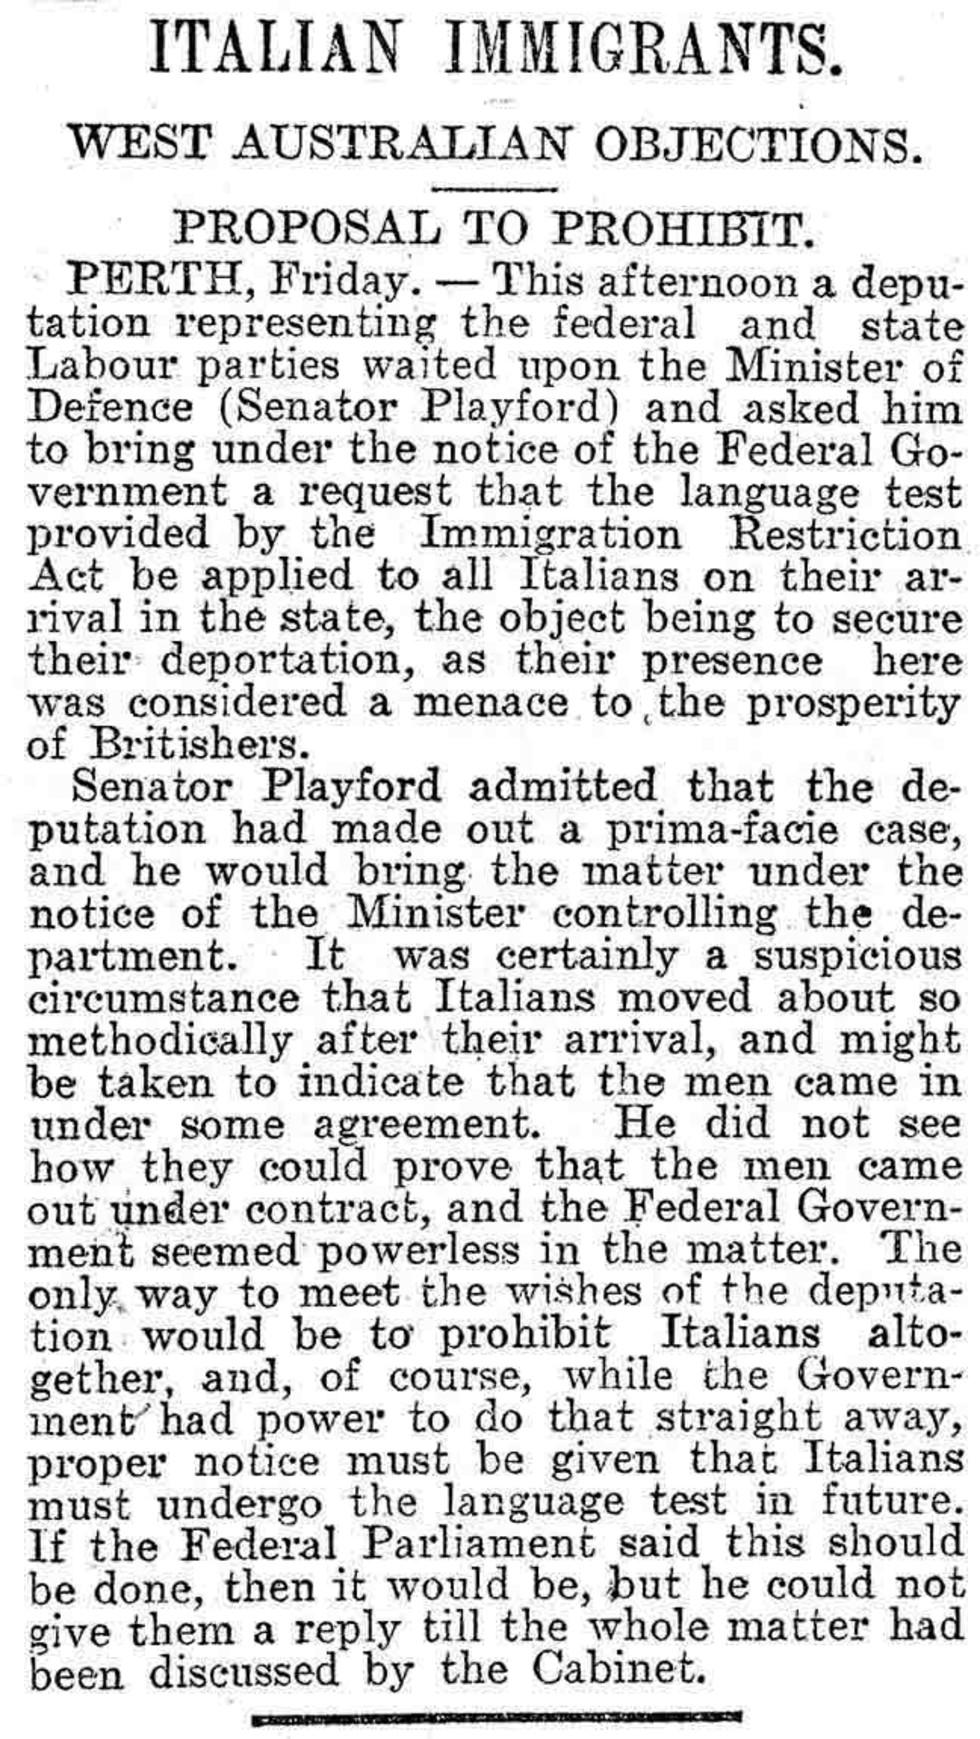 News paper article outlining West Australian request to prohibit Italian migration.